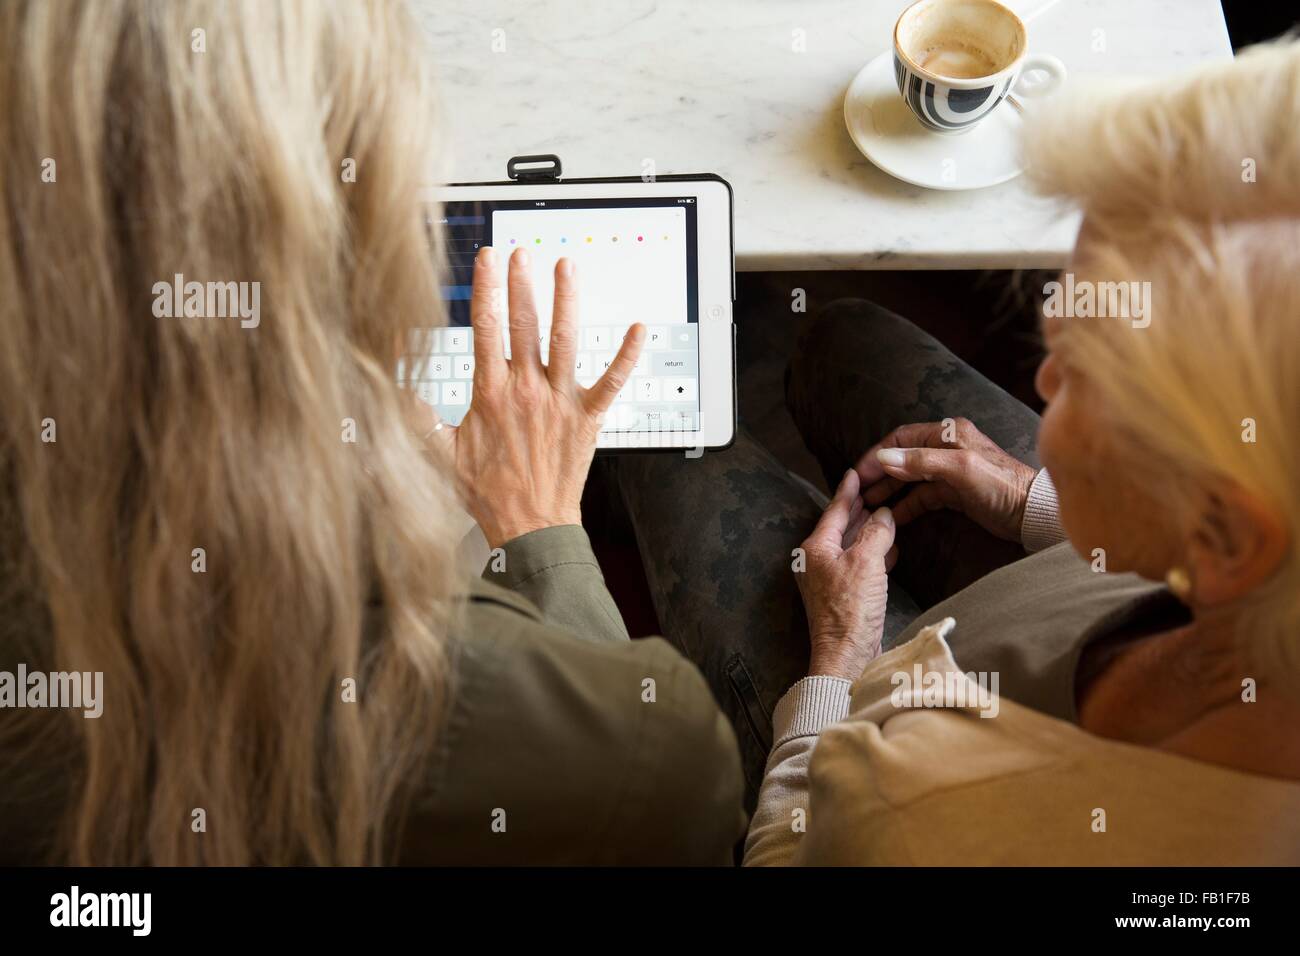 Mother and daughter sitting together in cafe, looking at digital tablet, rear view Stock Photo